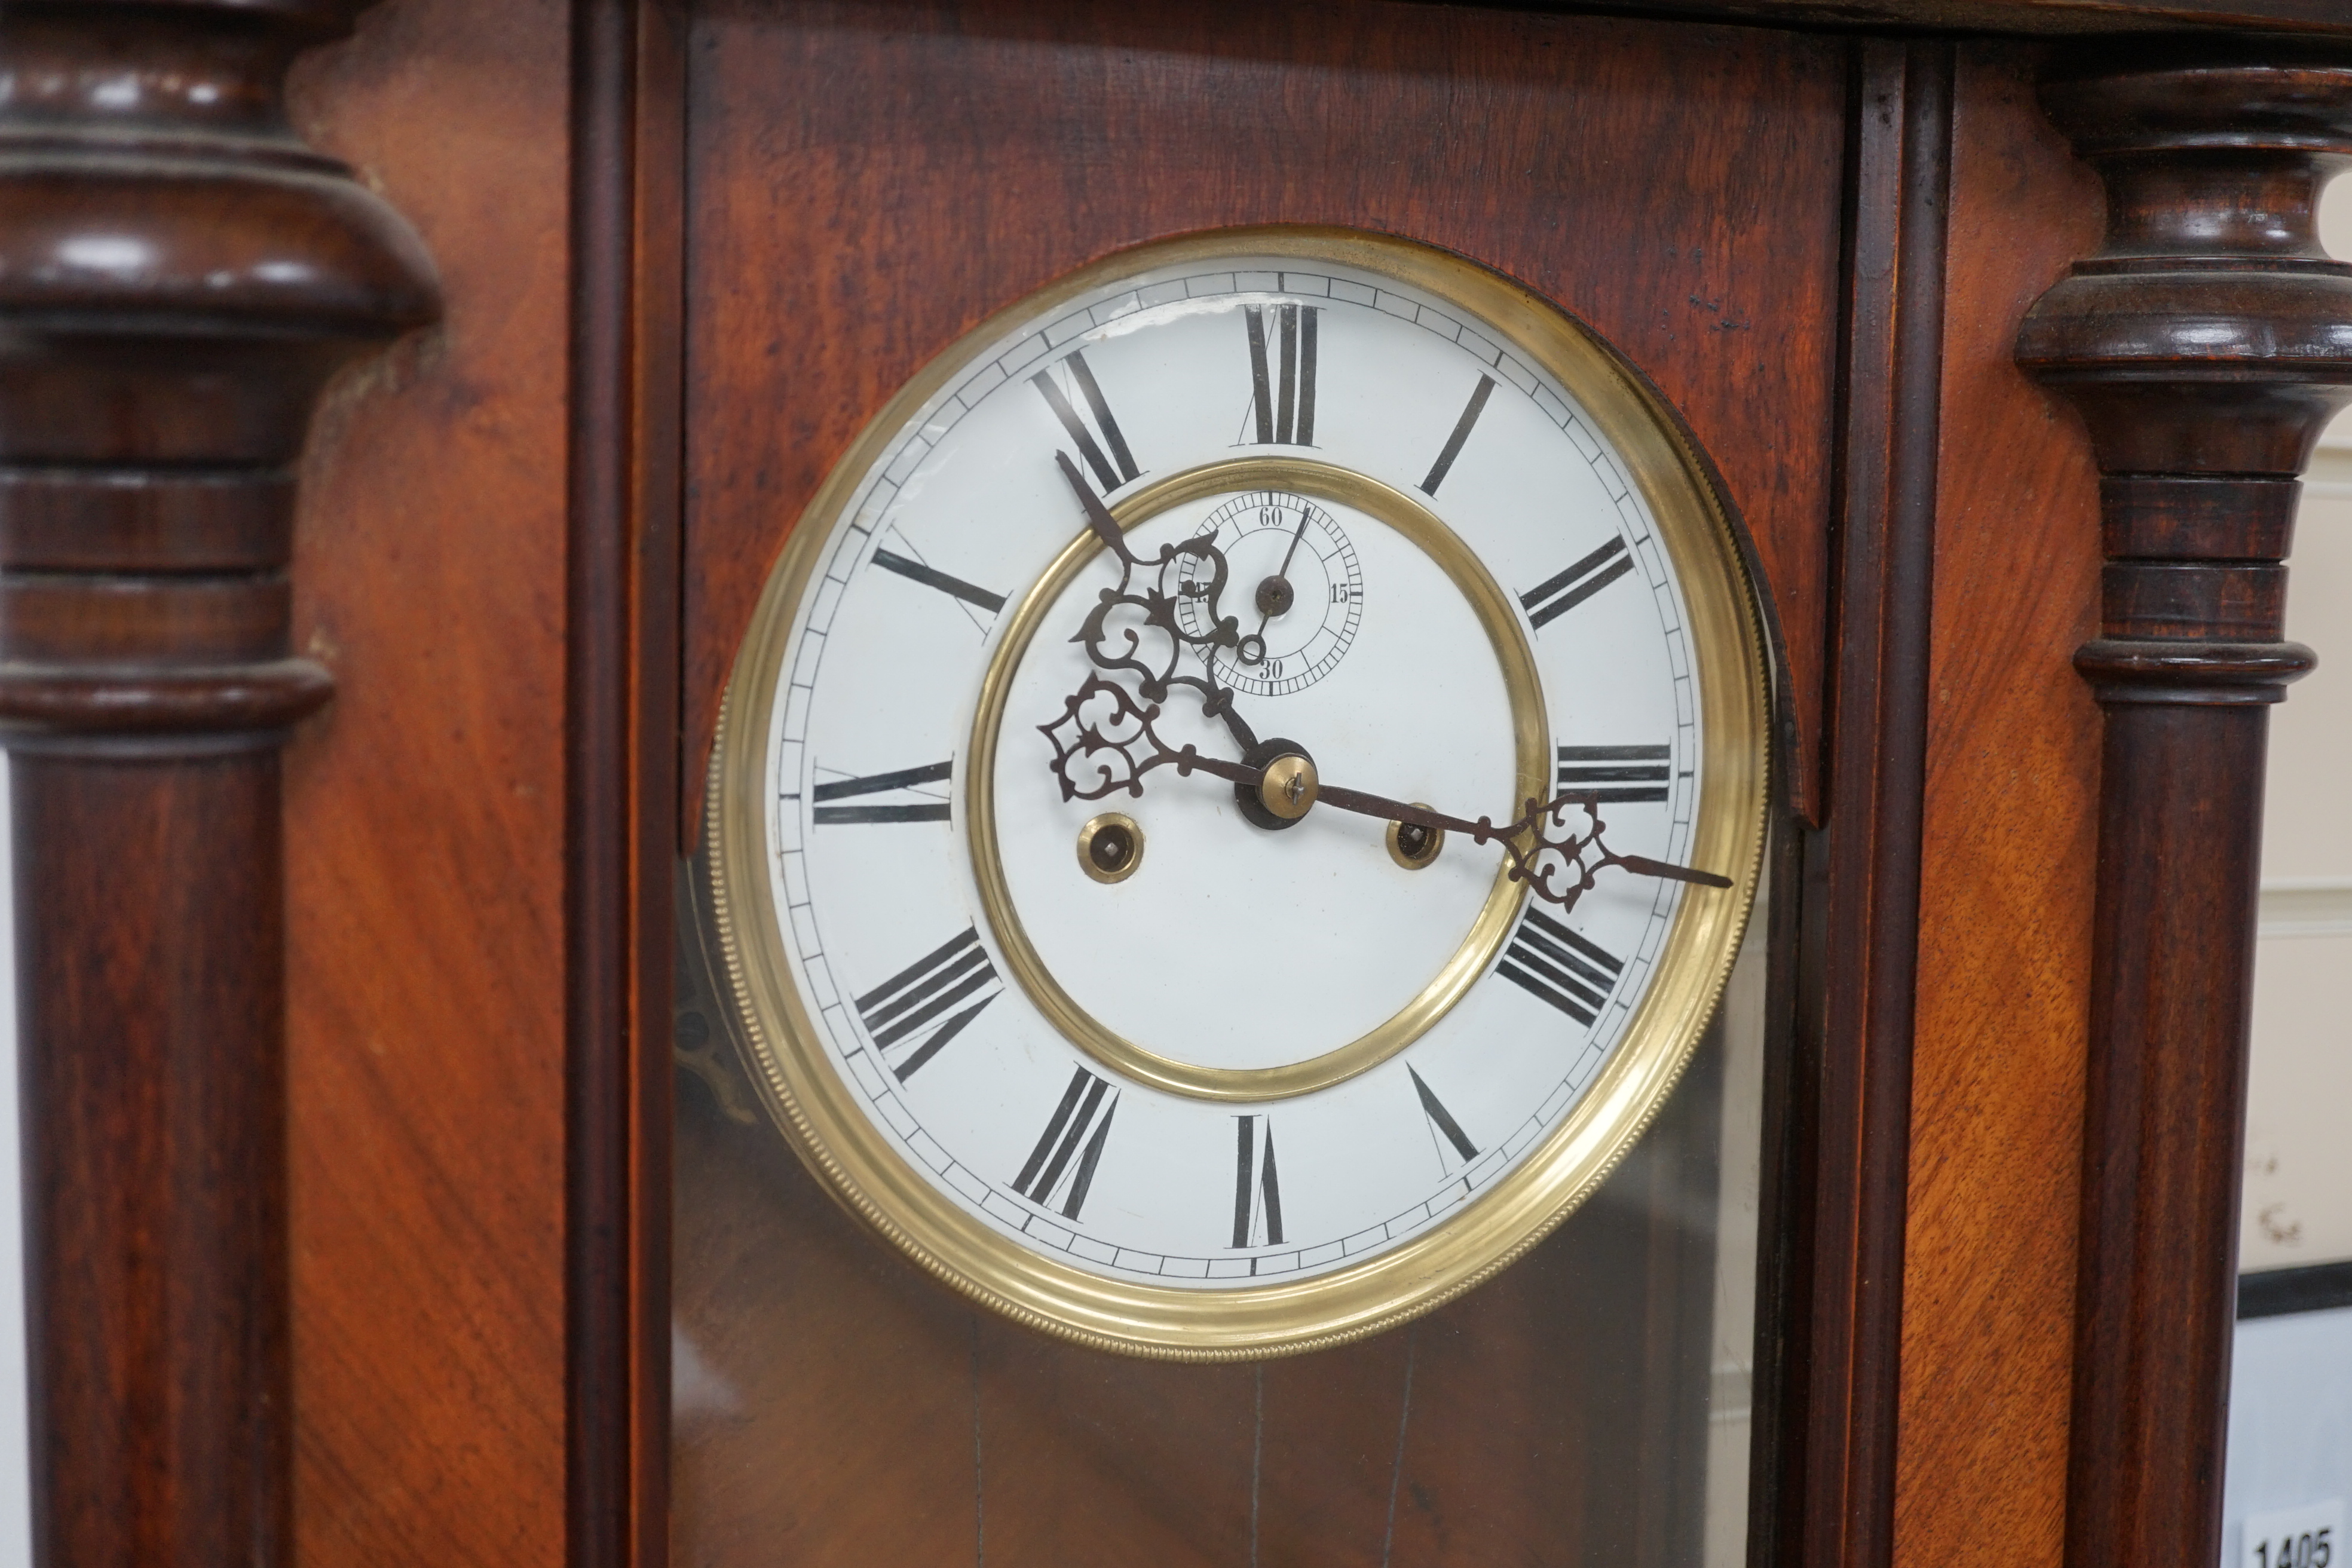 A mahogany Vienna regulator wall clock, approximately 120cm high. Condition - unknown if in working condition, dial good, case has minor scratches